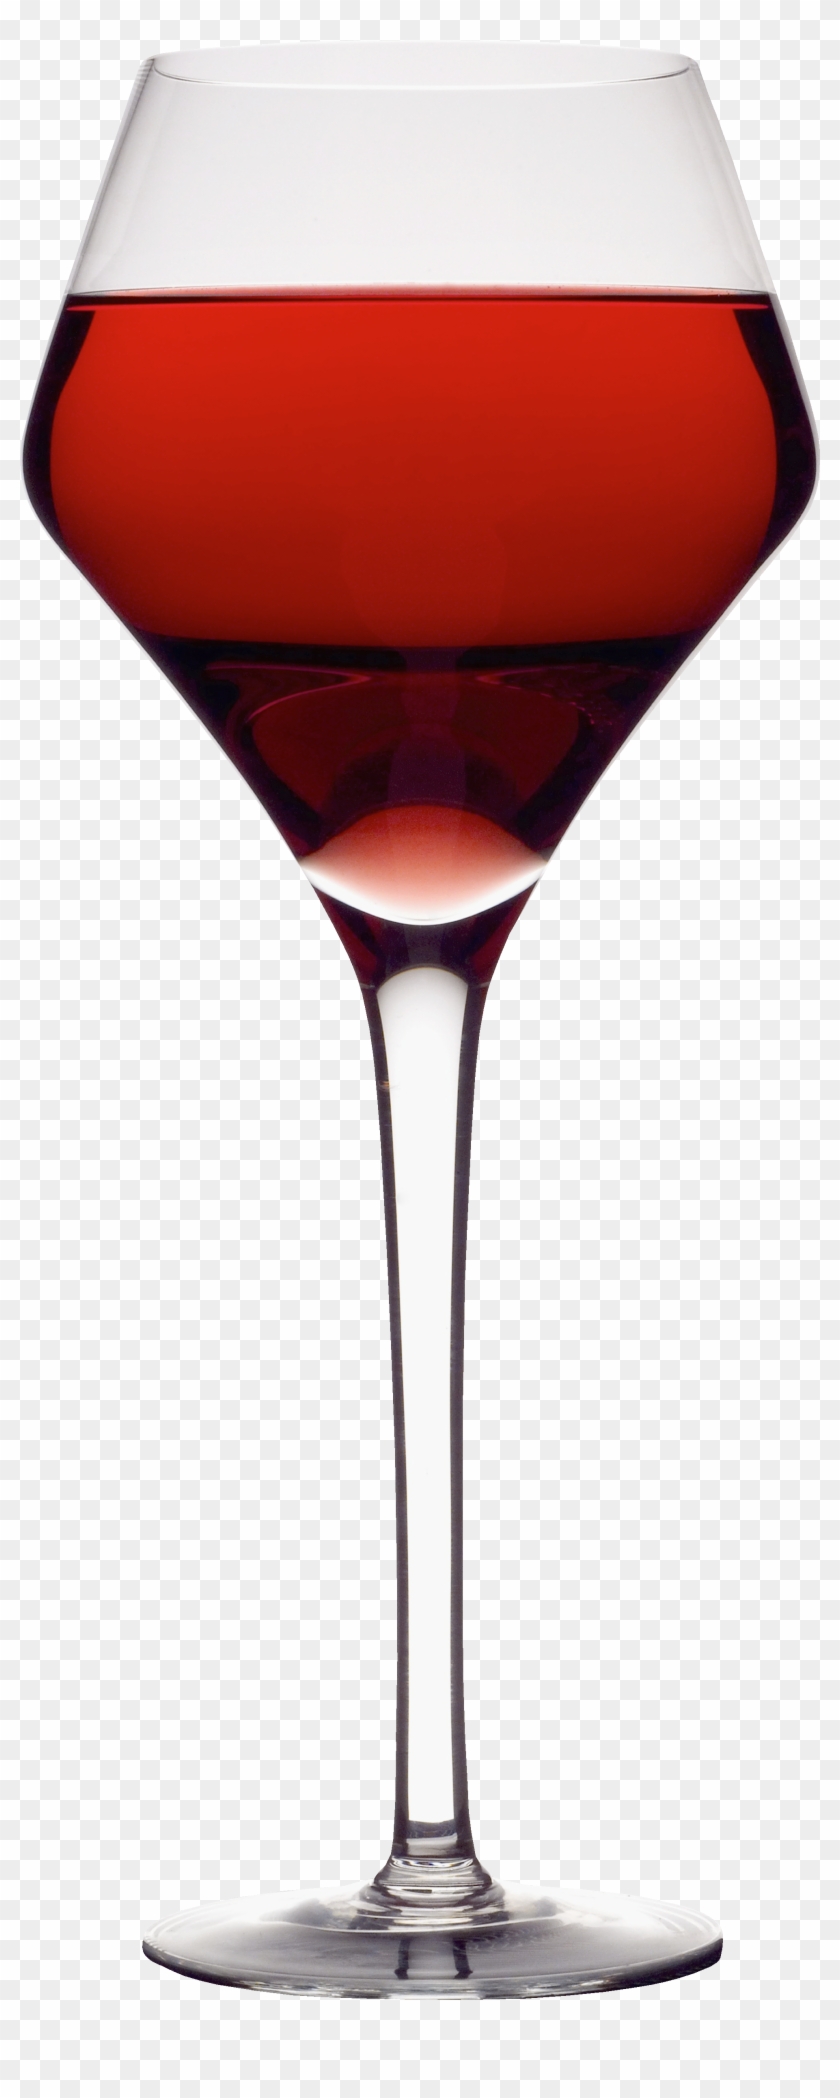 Glass Png Image - Wine Glass No Background Clipart #34213